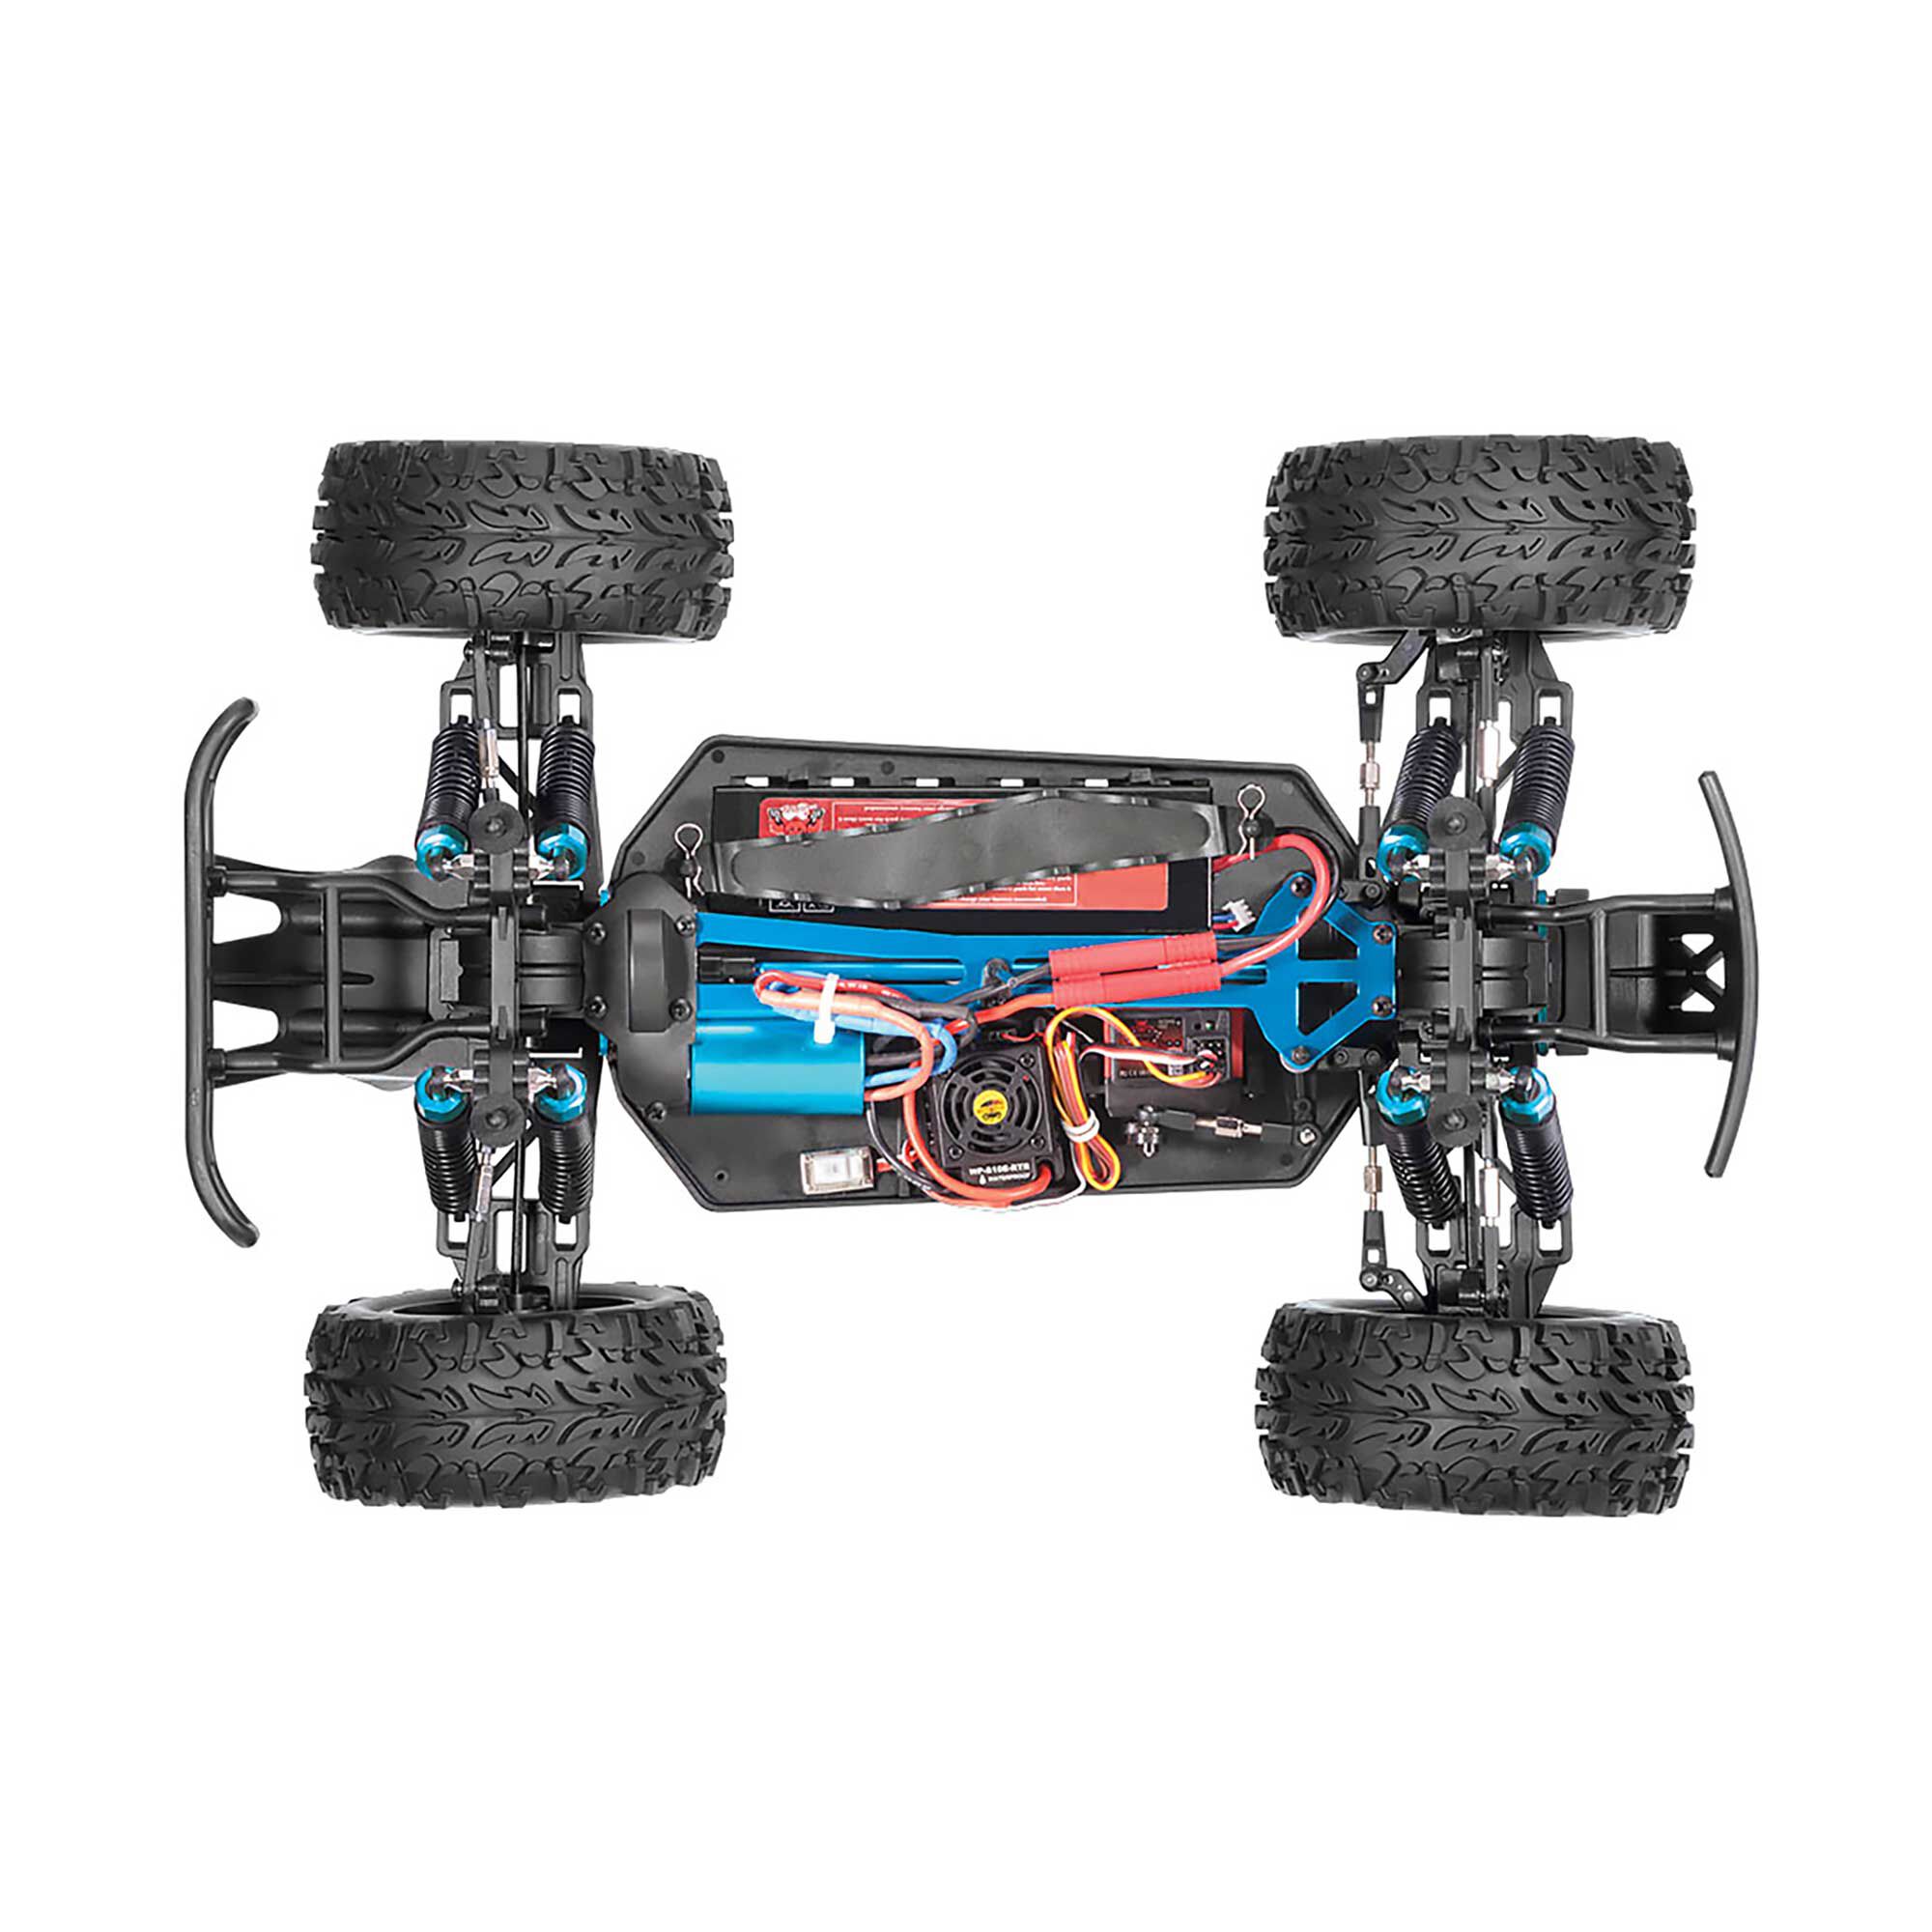 Redcat Racing 1/10 Volcano EPX PRO 4WD 